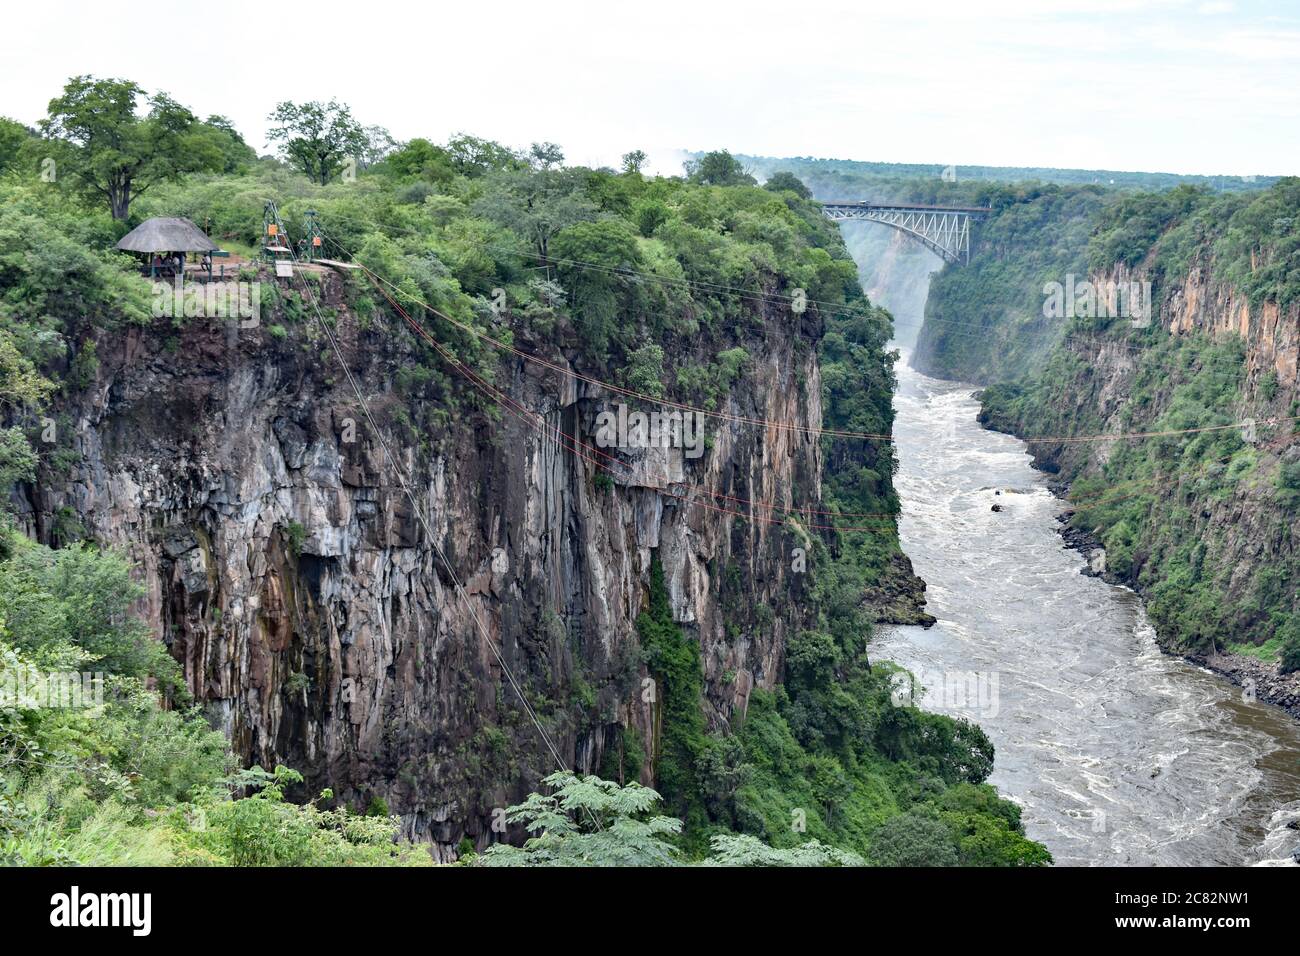 The second gorge formed by the Zambezi River.  Victoria Falls Bridge can be seen spanning the gorge.  Ropes cross the river for zip lining. Stock Photo